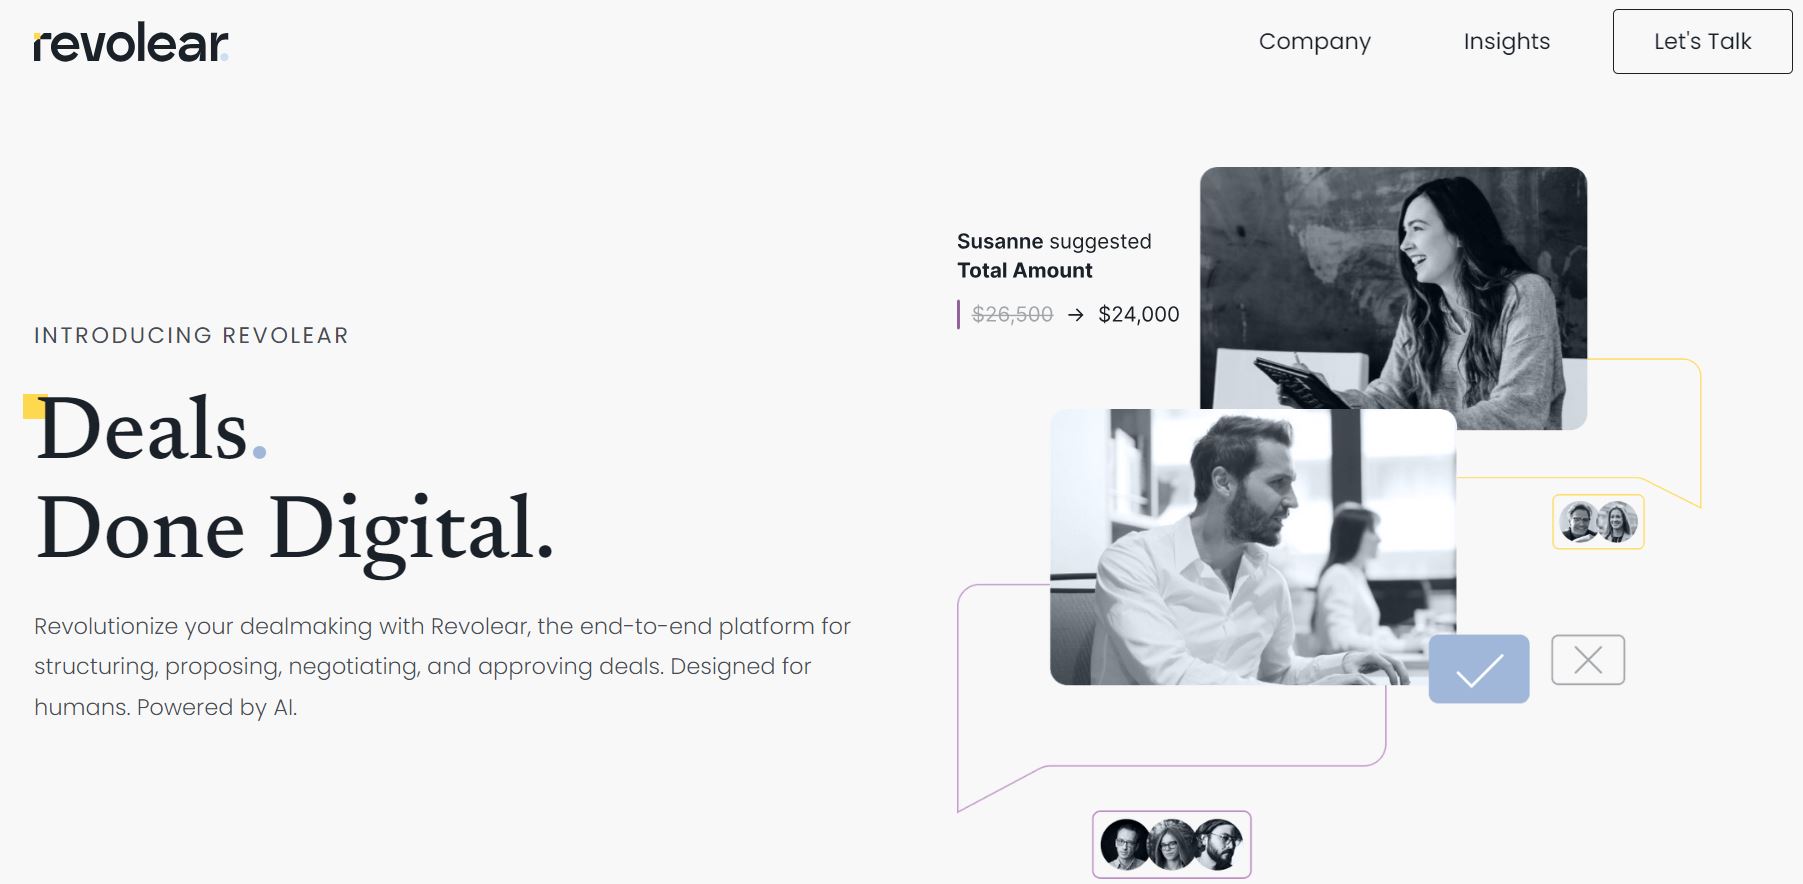 With a remarkable $6M raised in seed funding and led by visionary founder Raja Singh, Revolear is poised to transform the way deals are structured, proposed, negotiated, and approved.